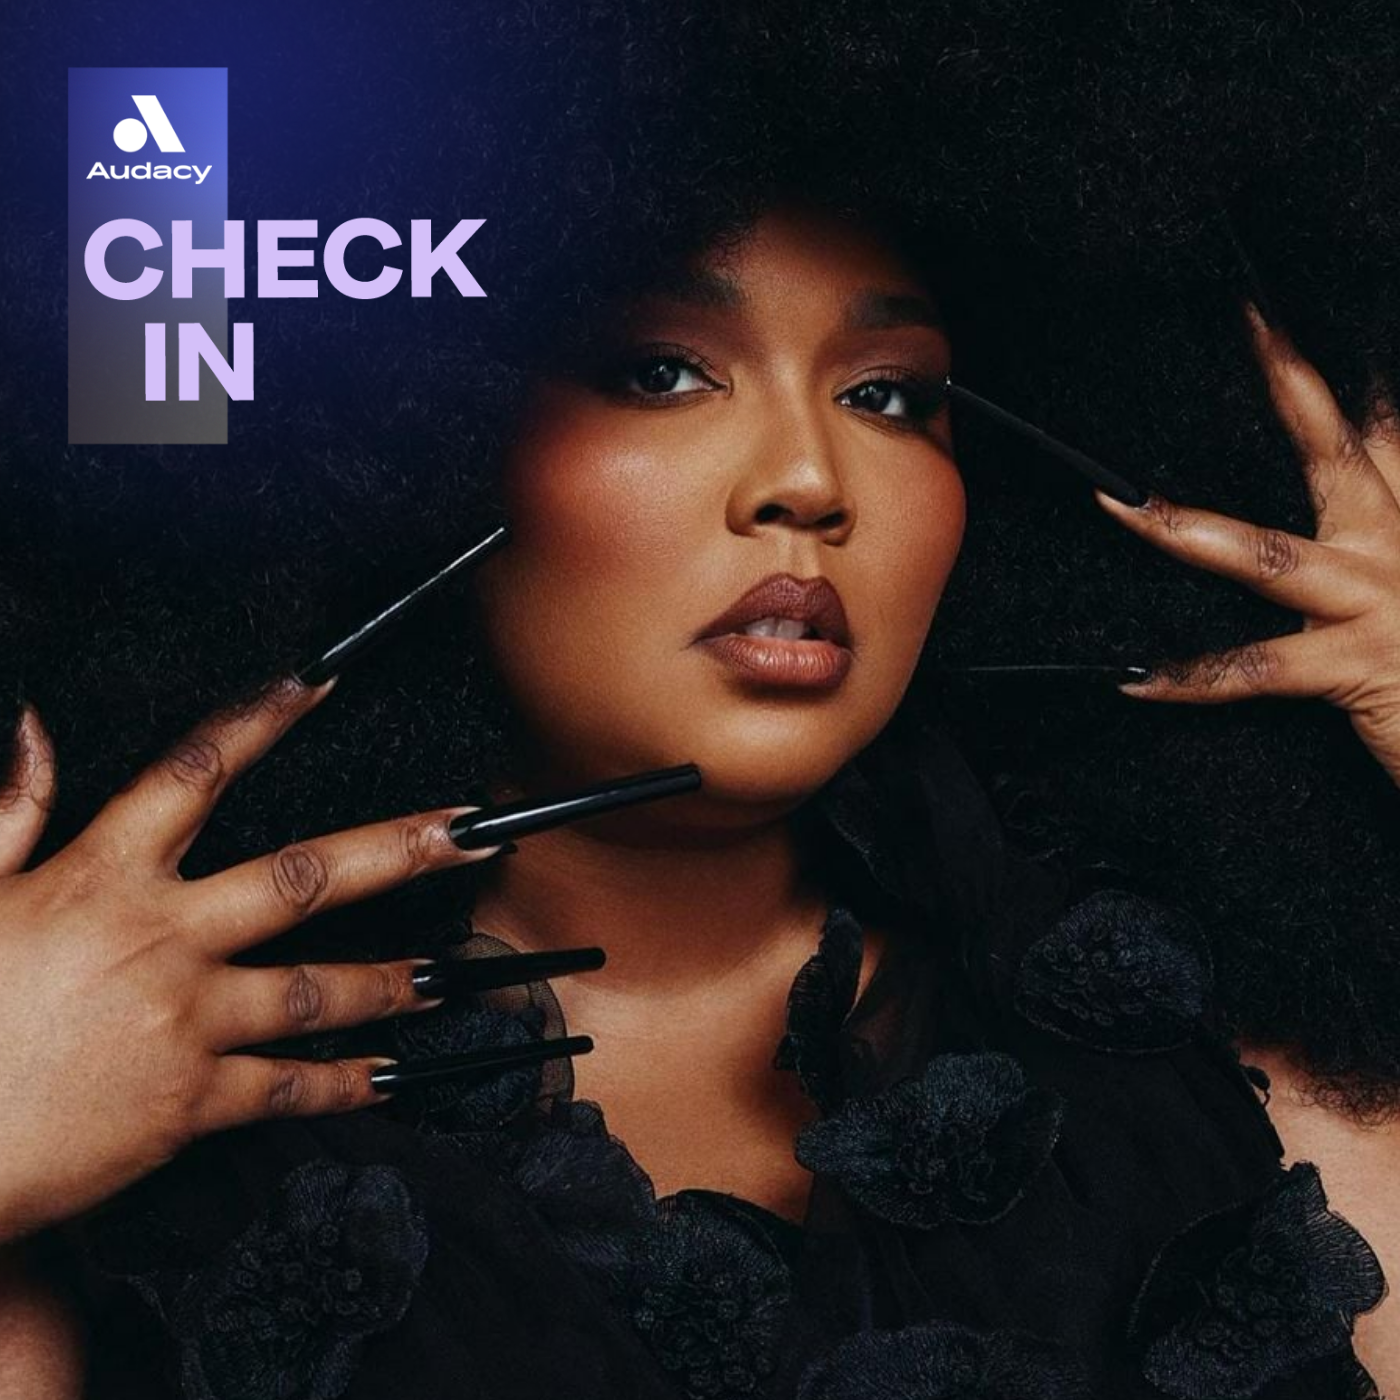 Lizzo | Audacy Check In | April 15, 2022